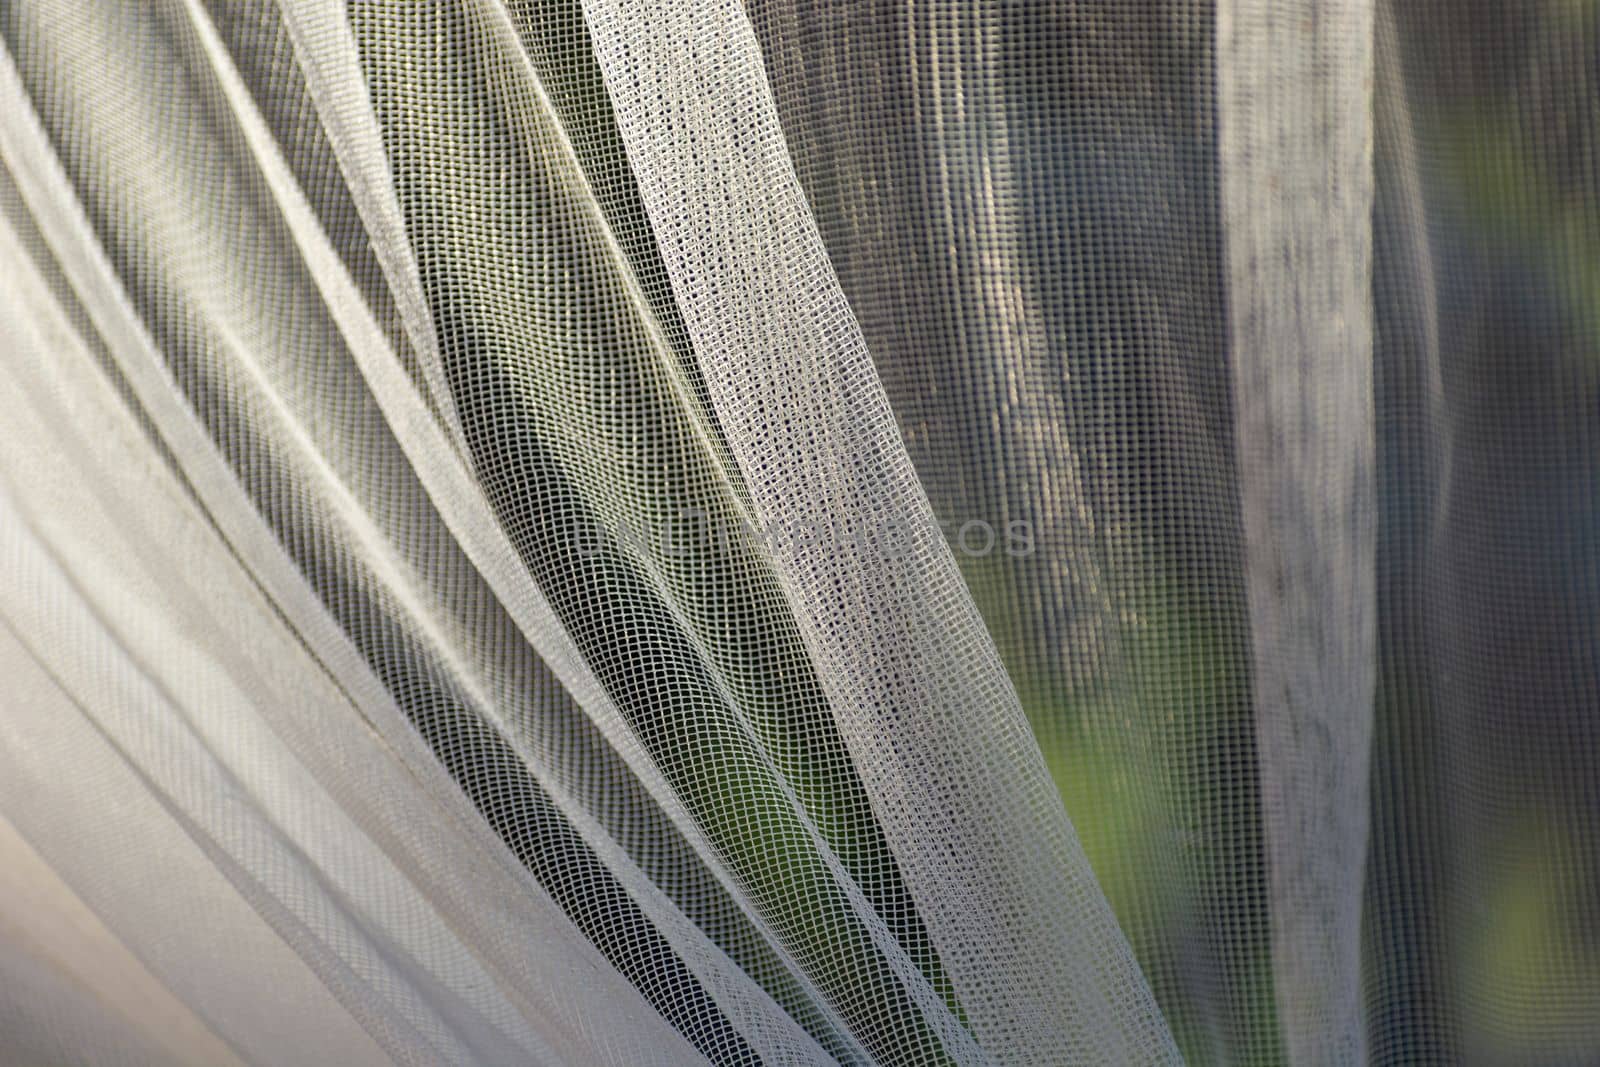 Close-up of a white and wrinkled mesh curtain by darekb22